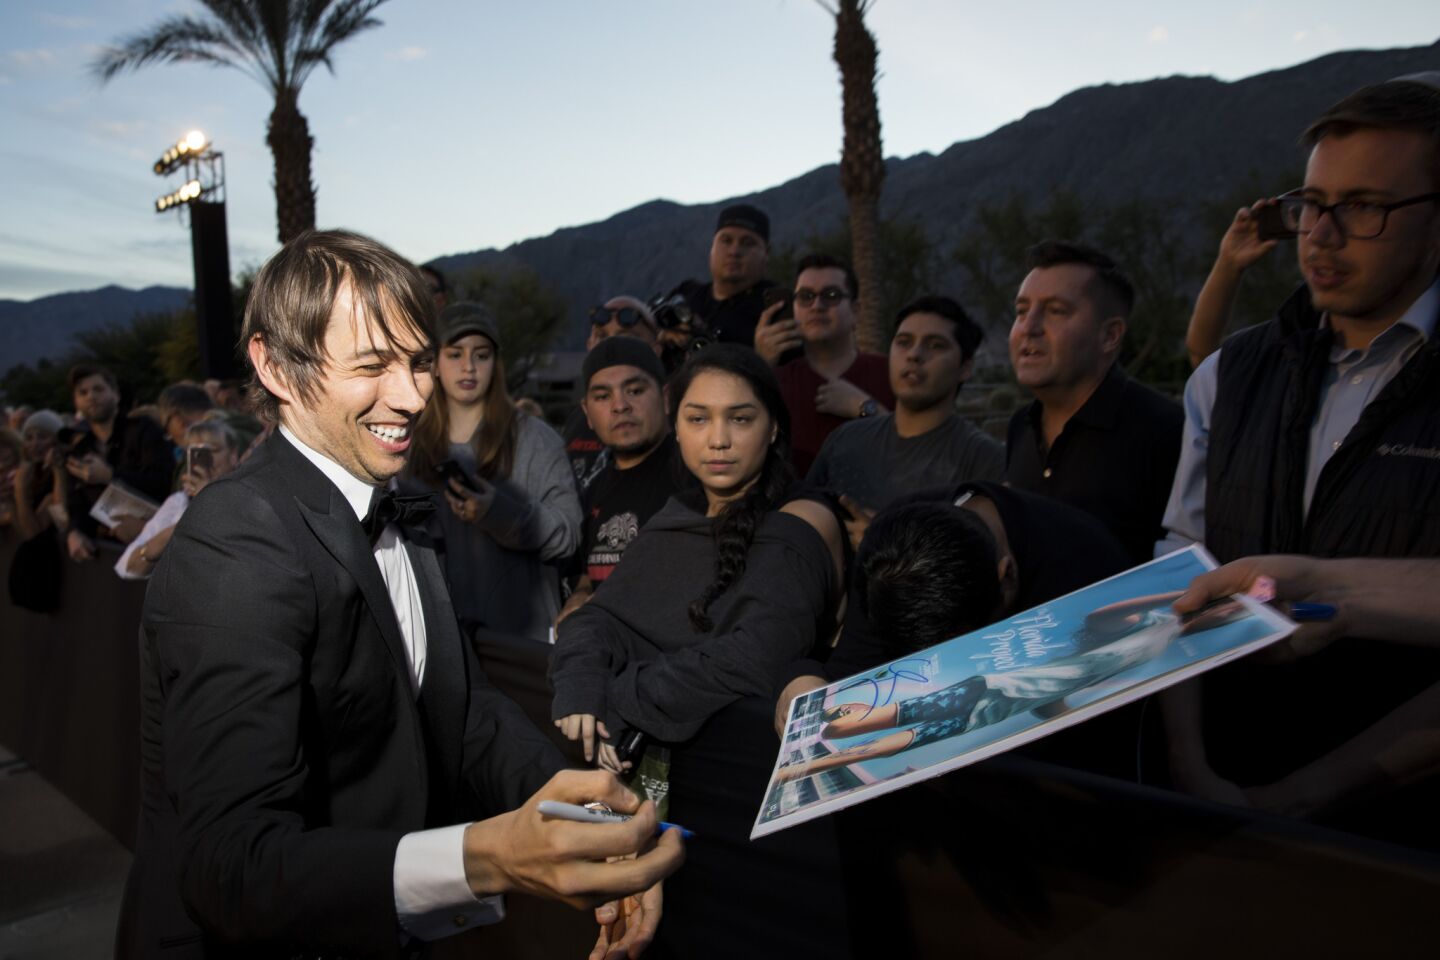 "The Florida Project" director Sean Baker signs autographs before hitting the red carpet of the Palm Springs International Film Festival Gala.